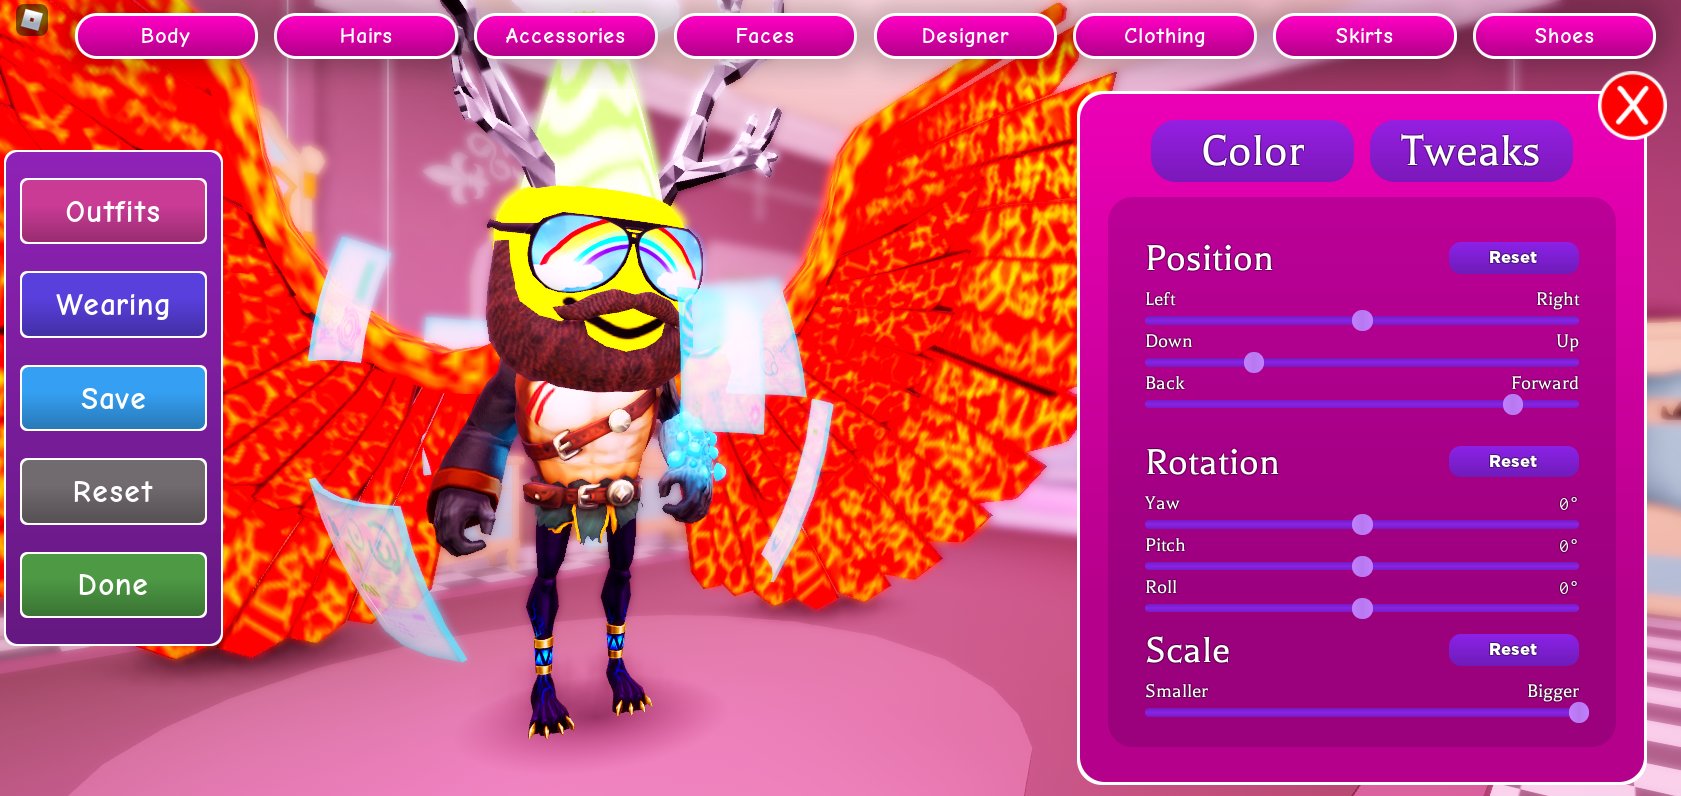 Max ツ Blm On Twitter Any Good Troll Outfits In Crown Academy So Far Curious To See If Anyone Has Realized The Full Potential Of The Game S Accessory Tweaking Functionality Lol - trolling outfits roblox free